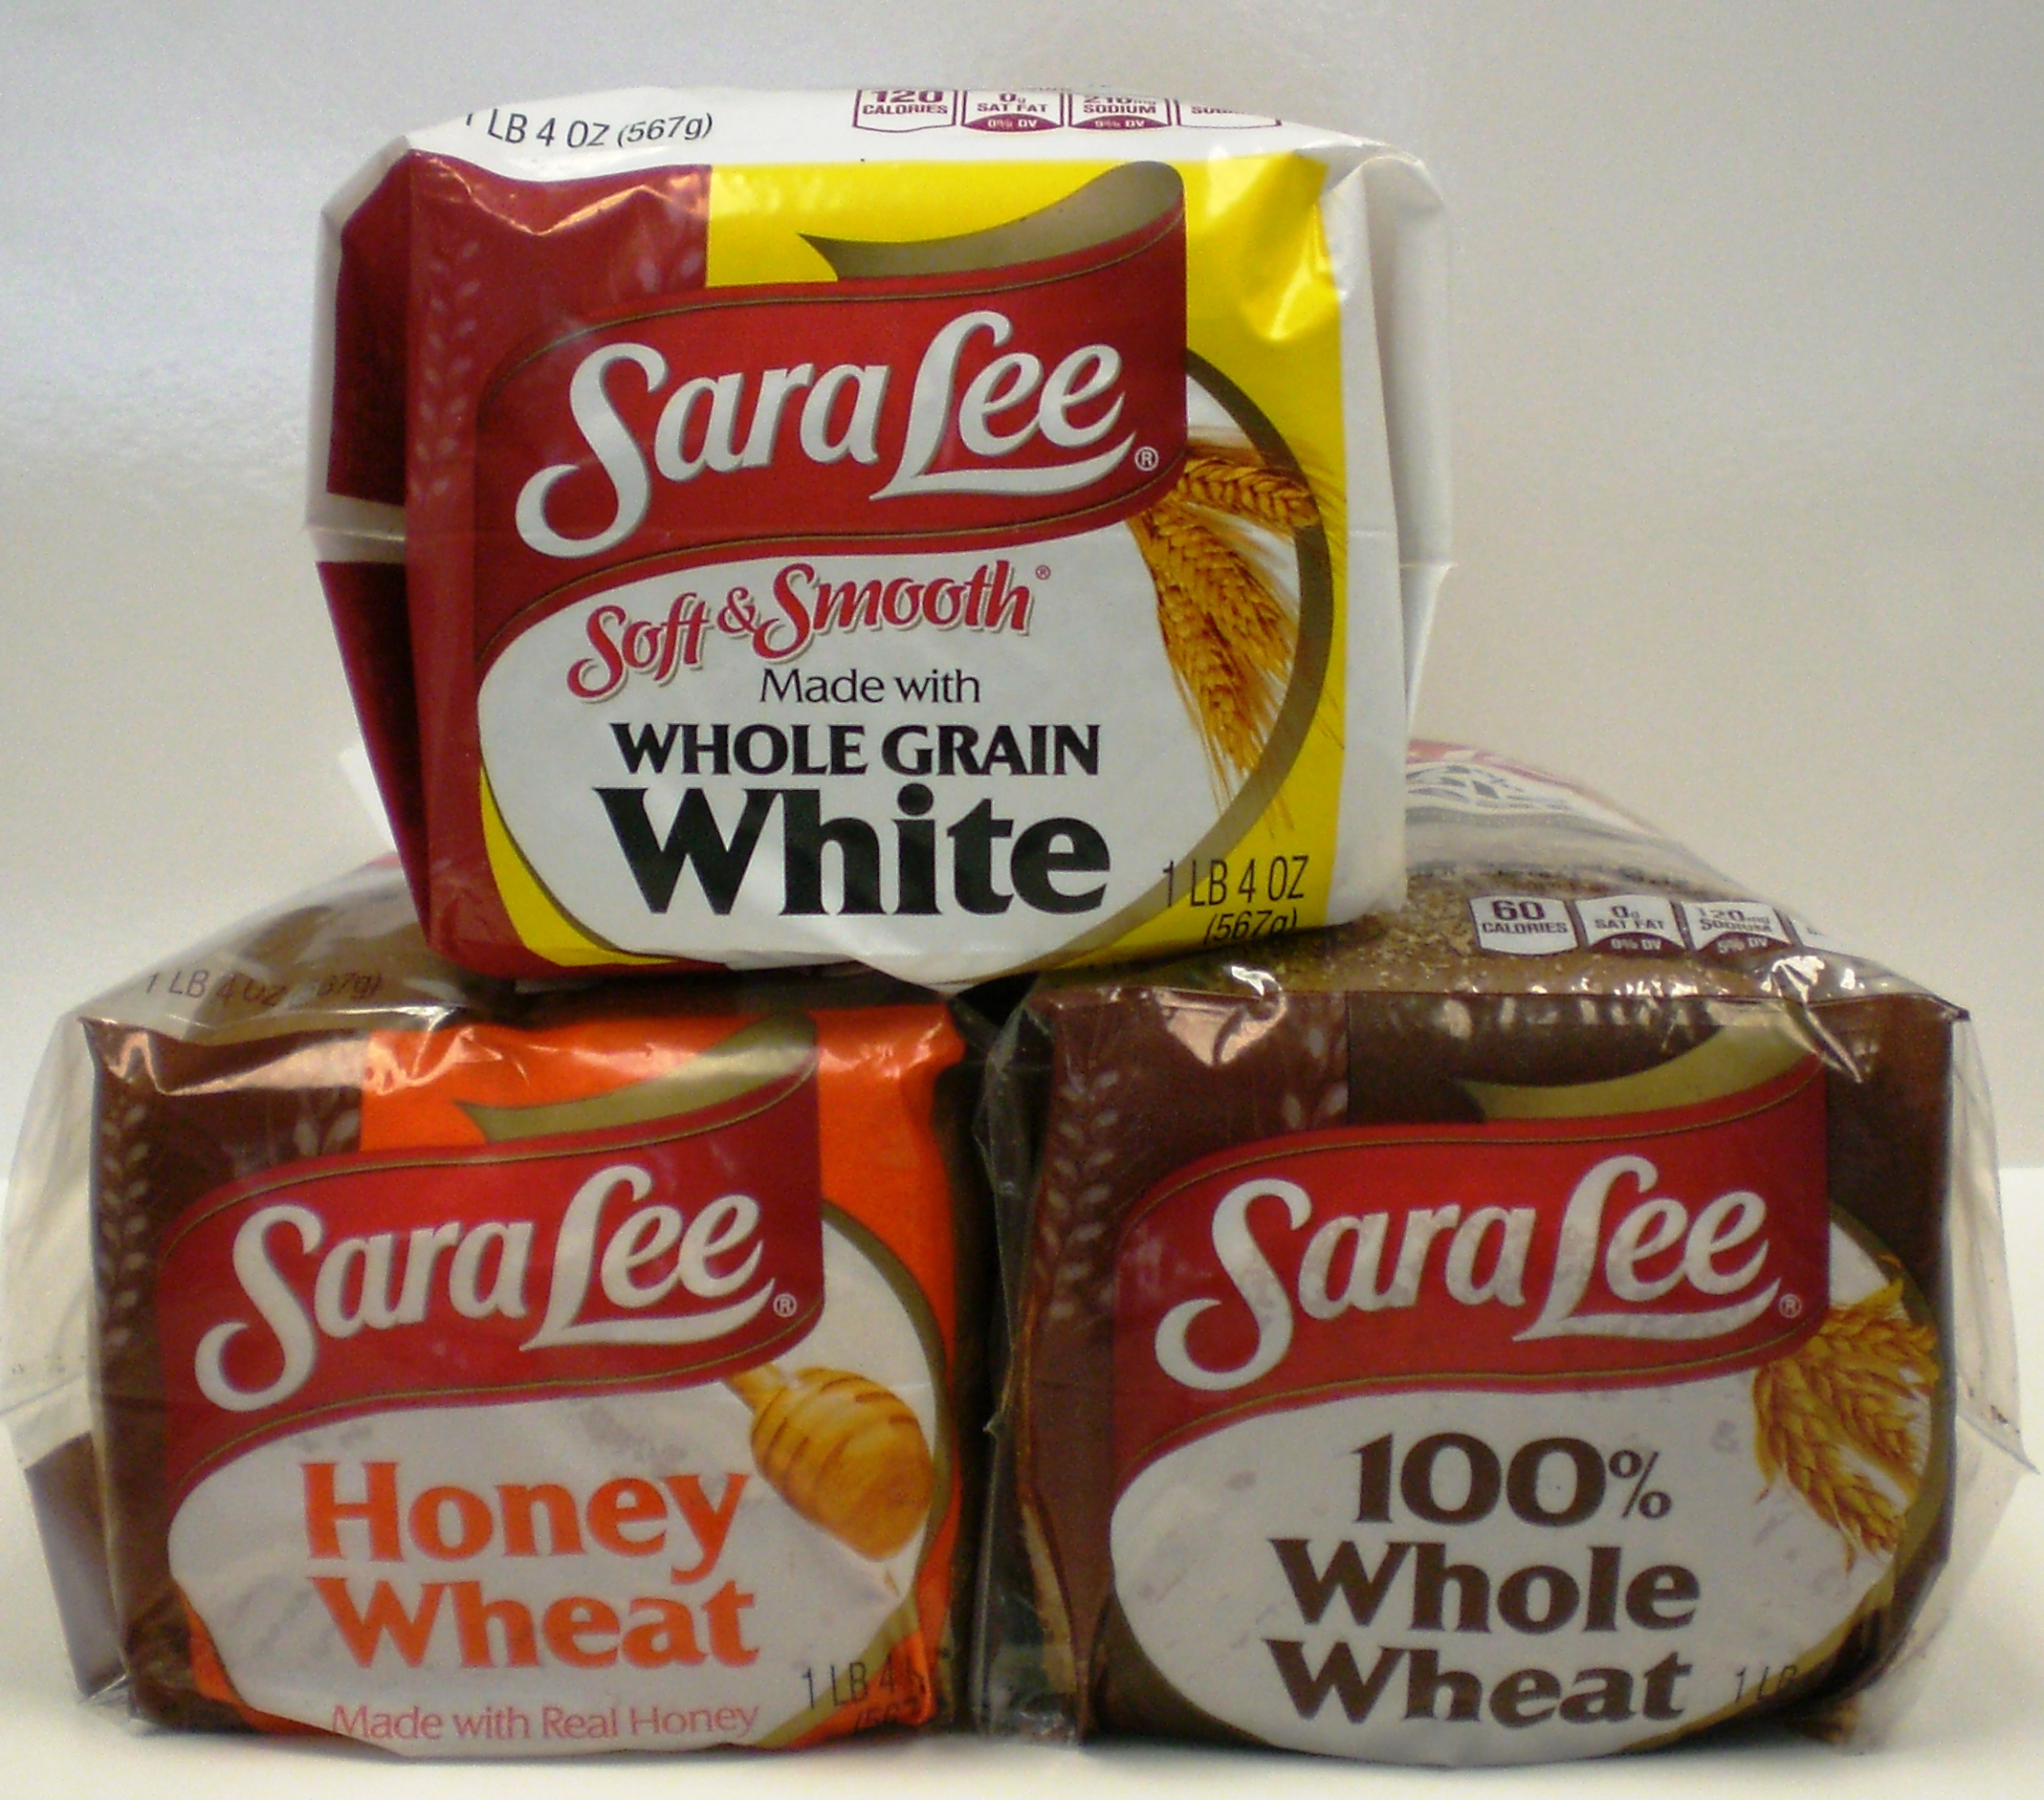 New Sara Lee Breads owner Bimbo expands US distribution